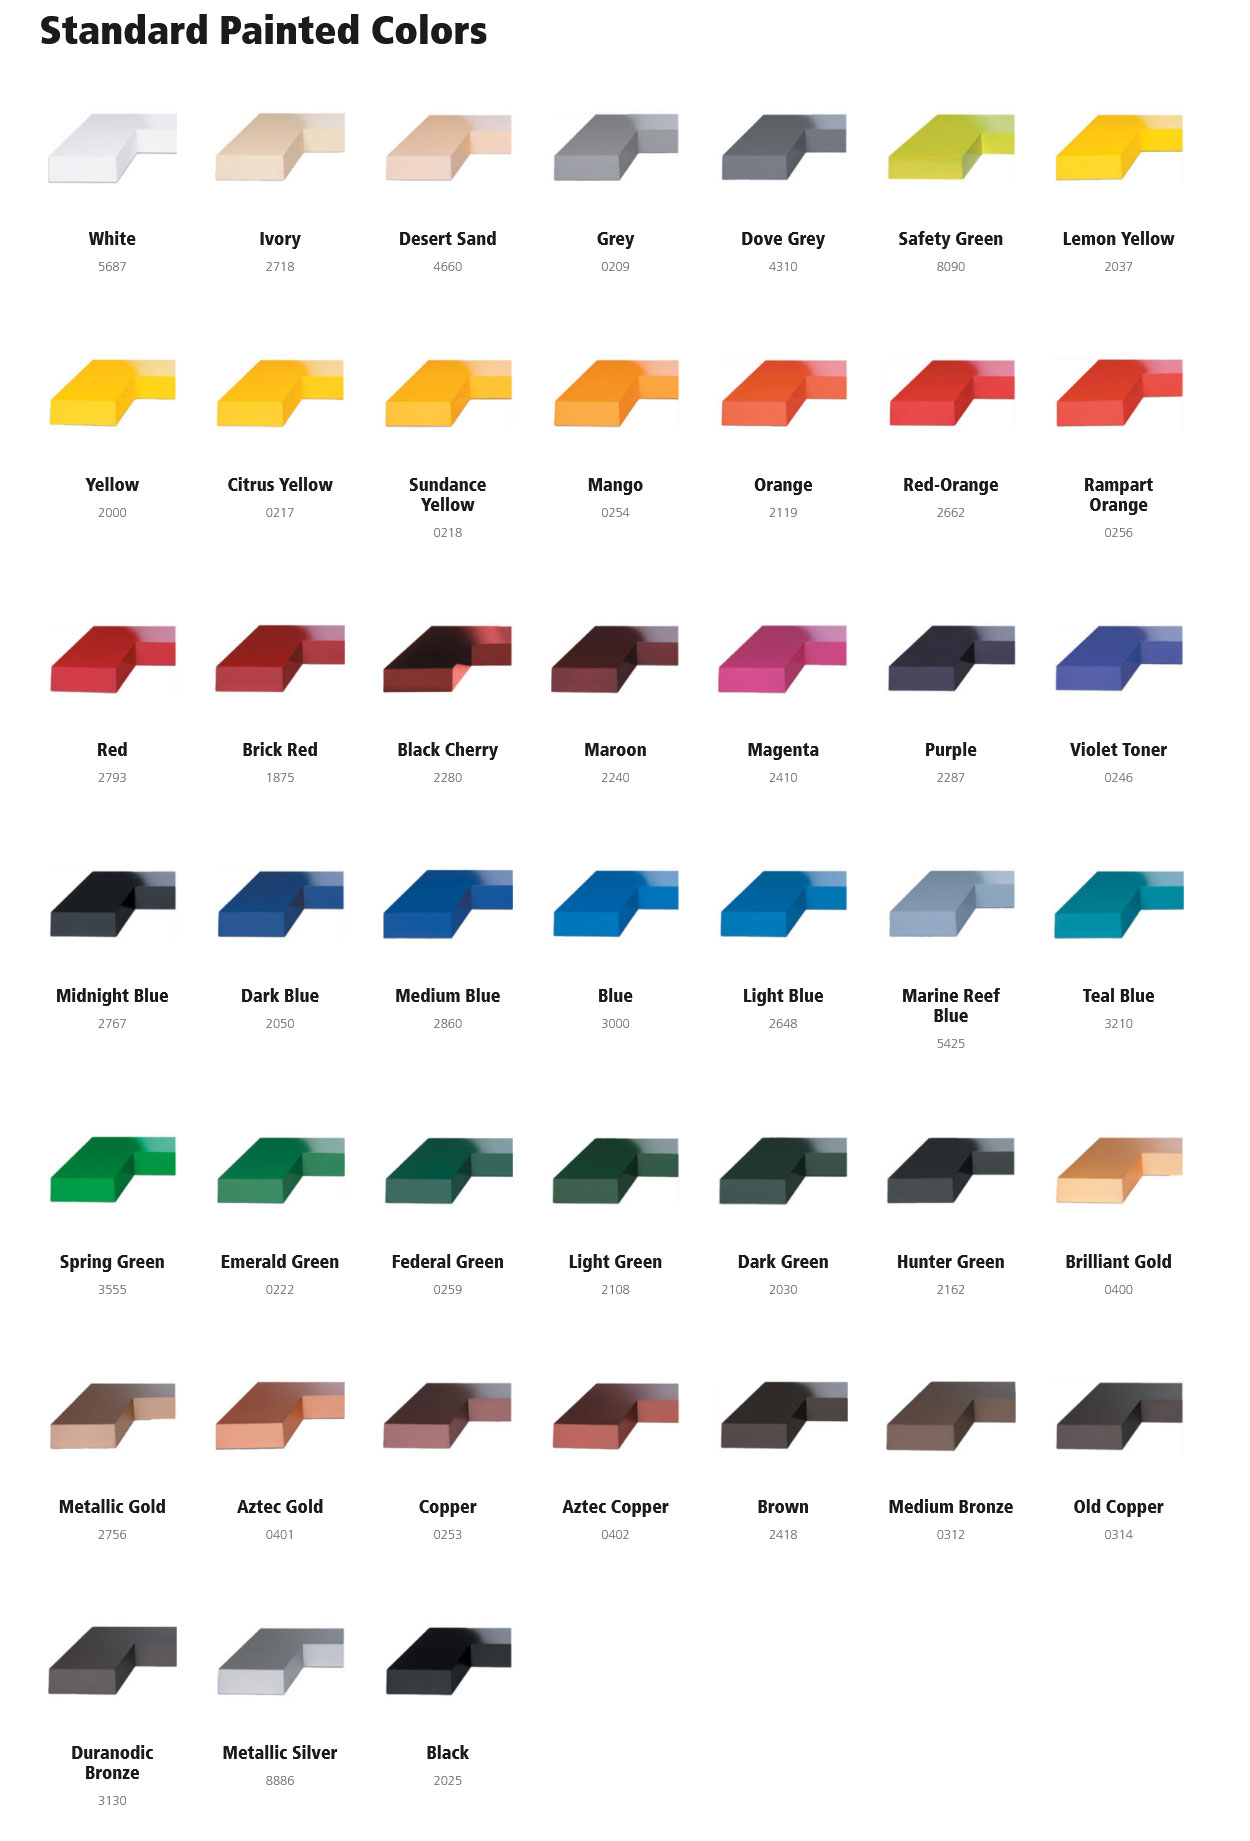 Standard Painted Colors